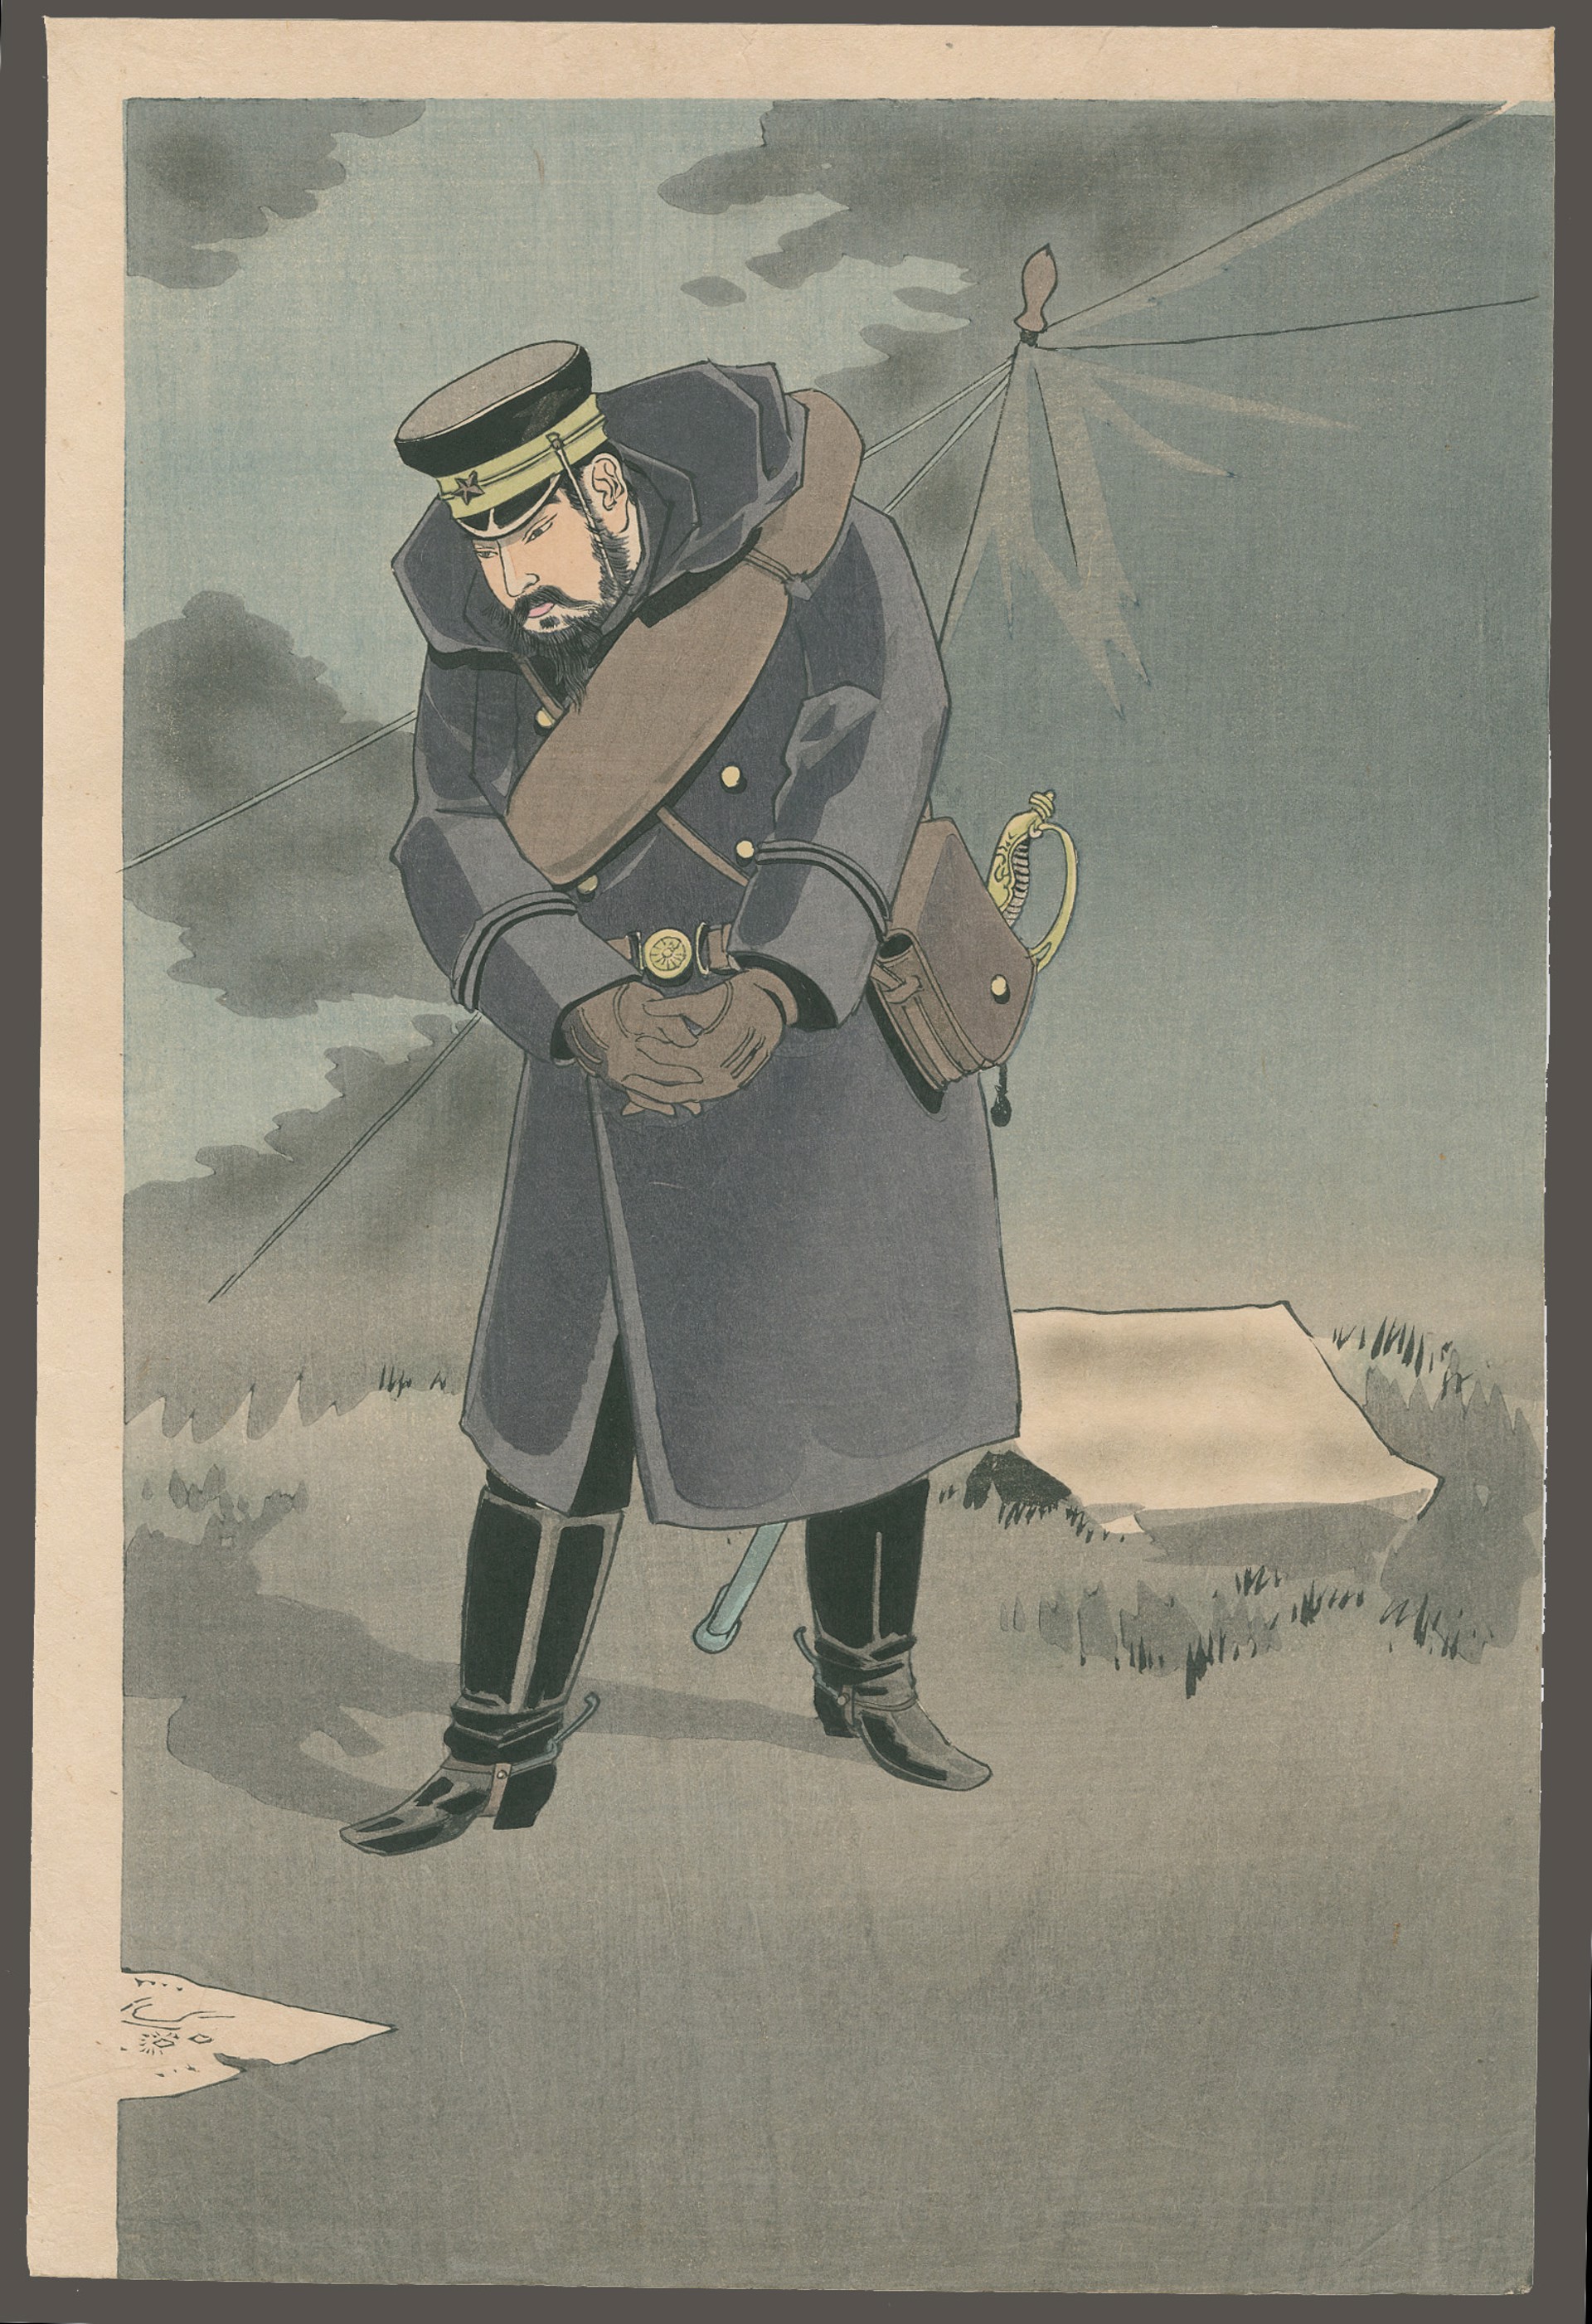 The Merciful Major Saito Coaxes a Captured Soldier to Give Up Enemy Secrets Sino - Japanese war by Beisaku